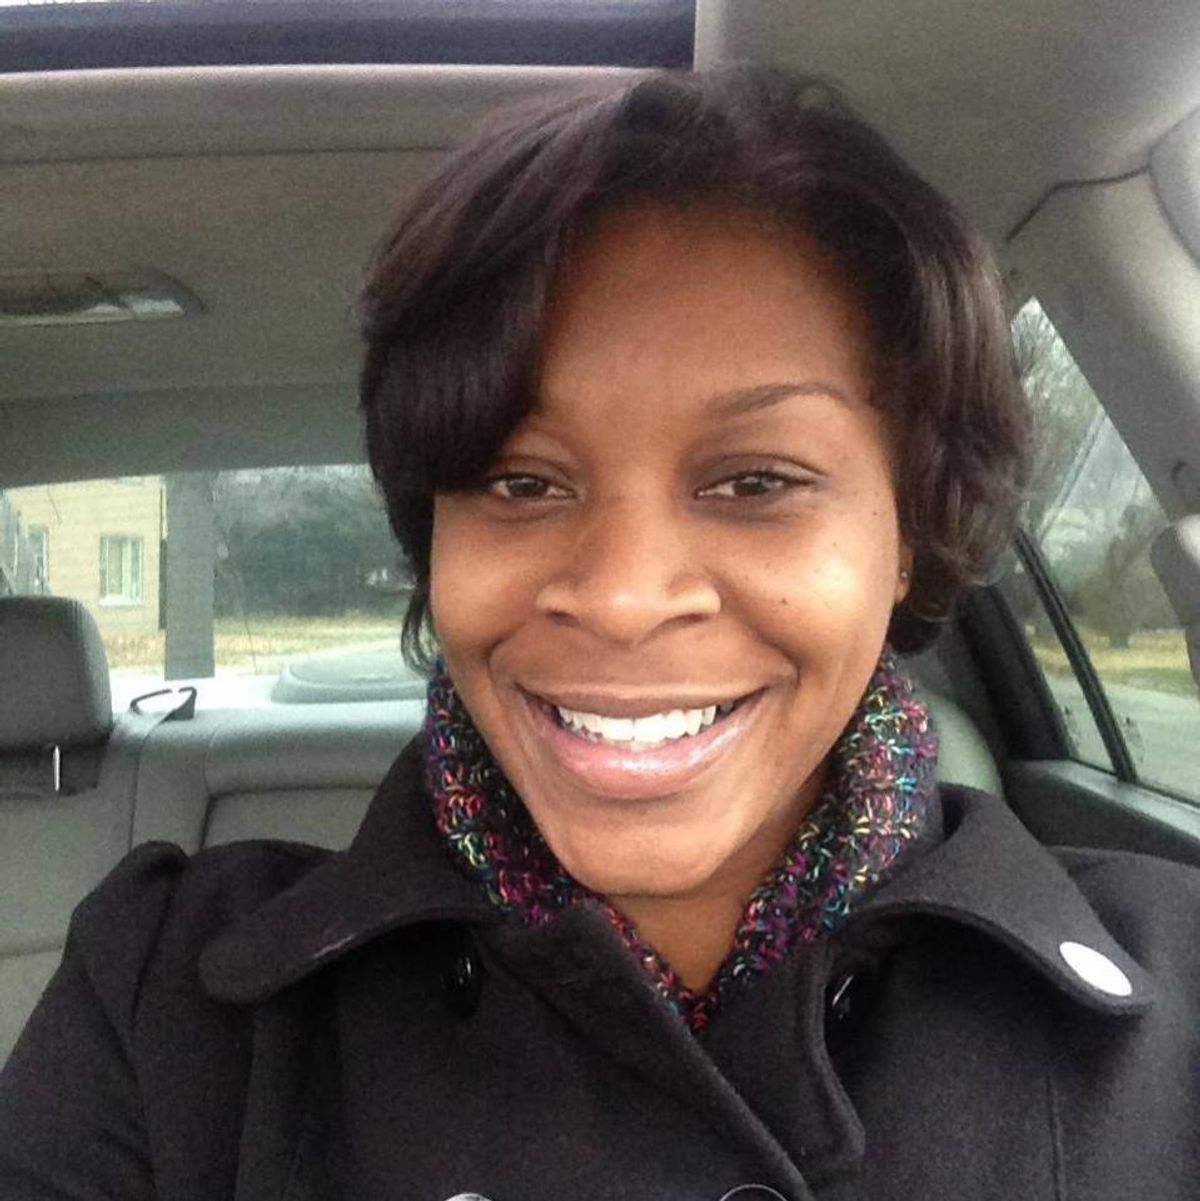 Sandra Bland's Family Gains A $1.9 Million Settlement And Reforms Promises